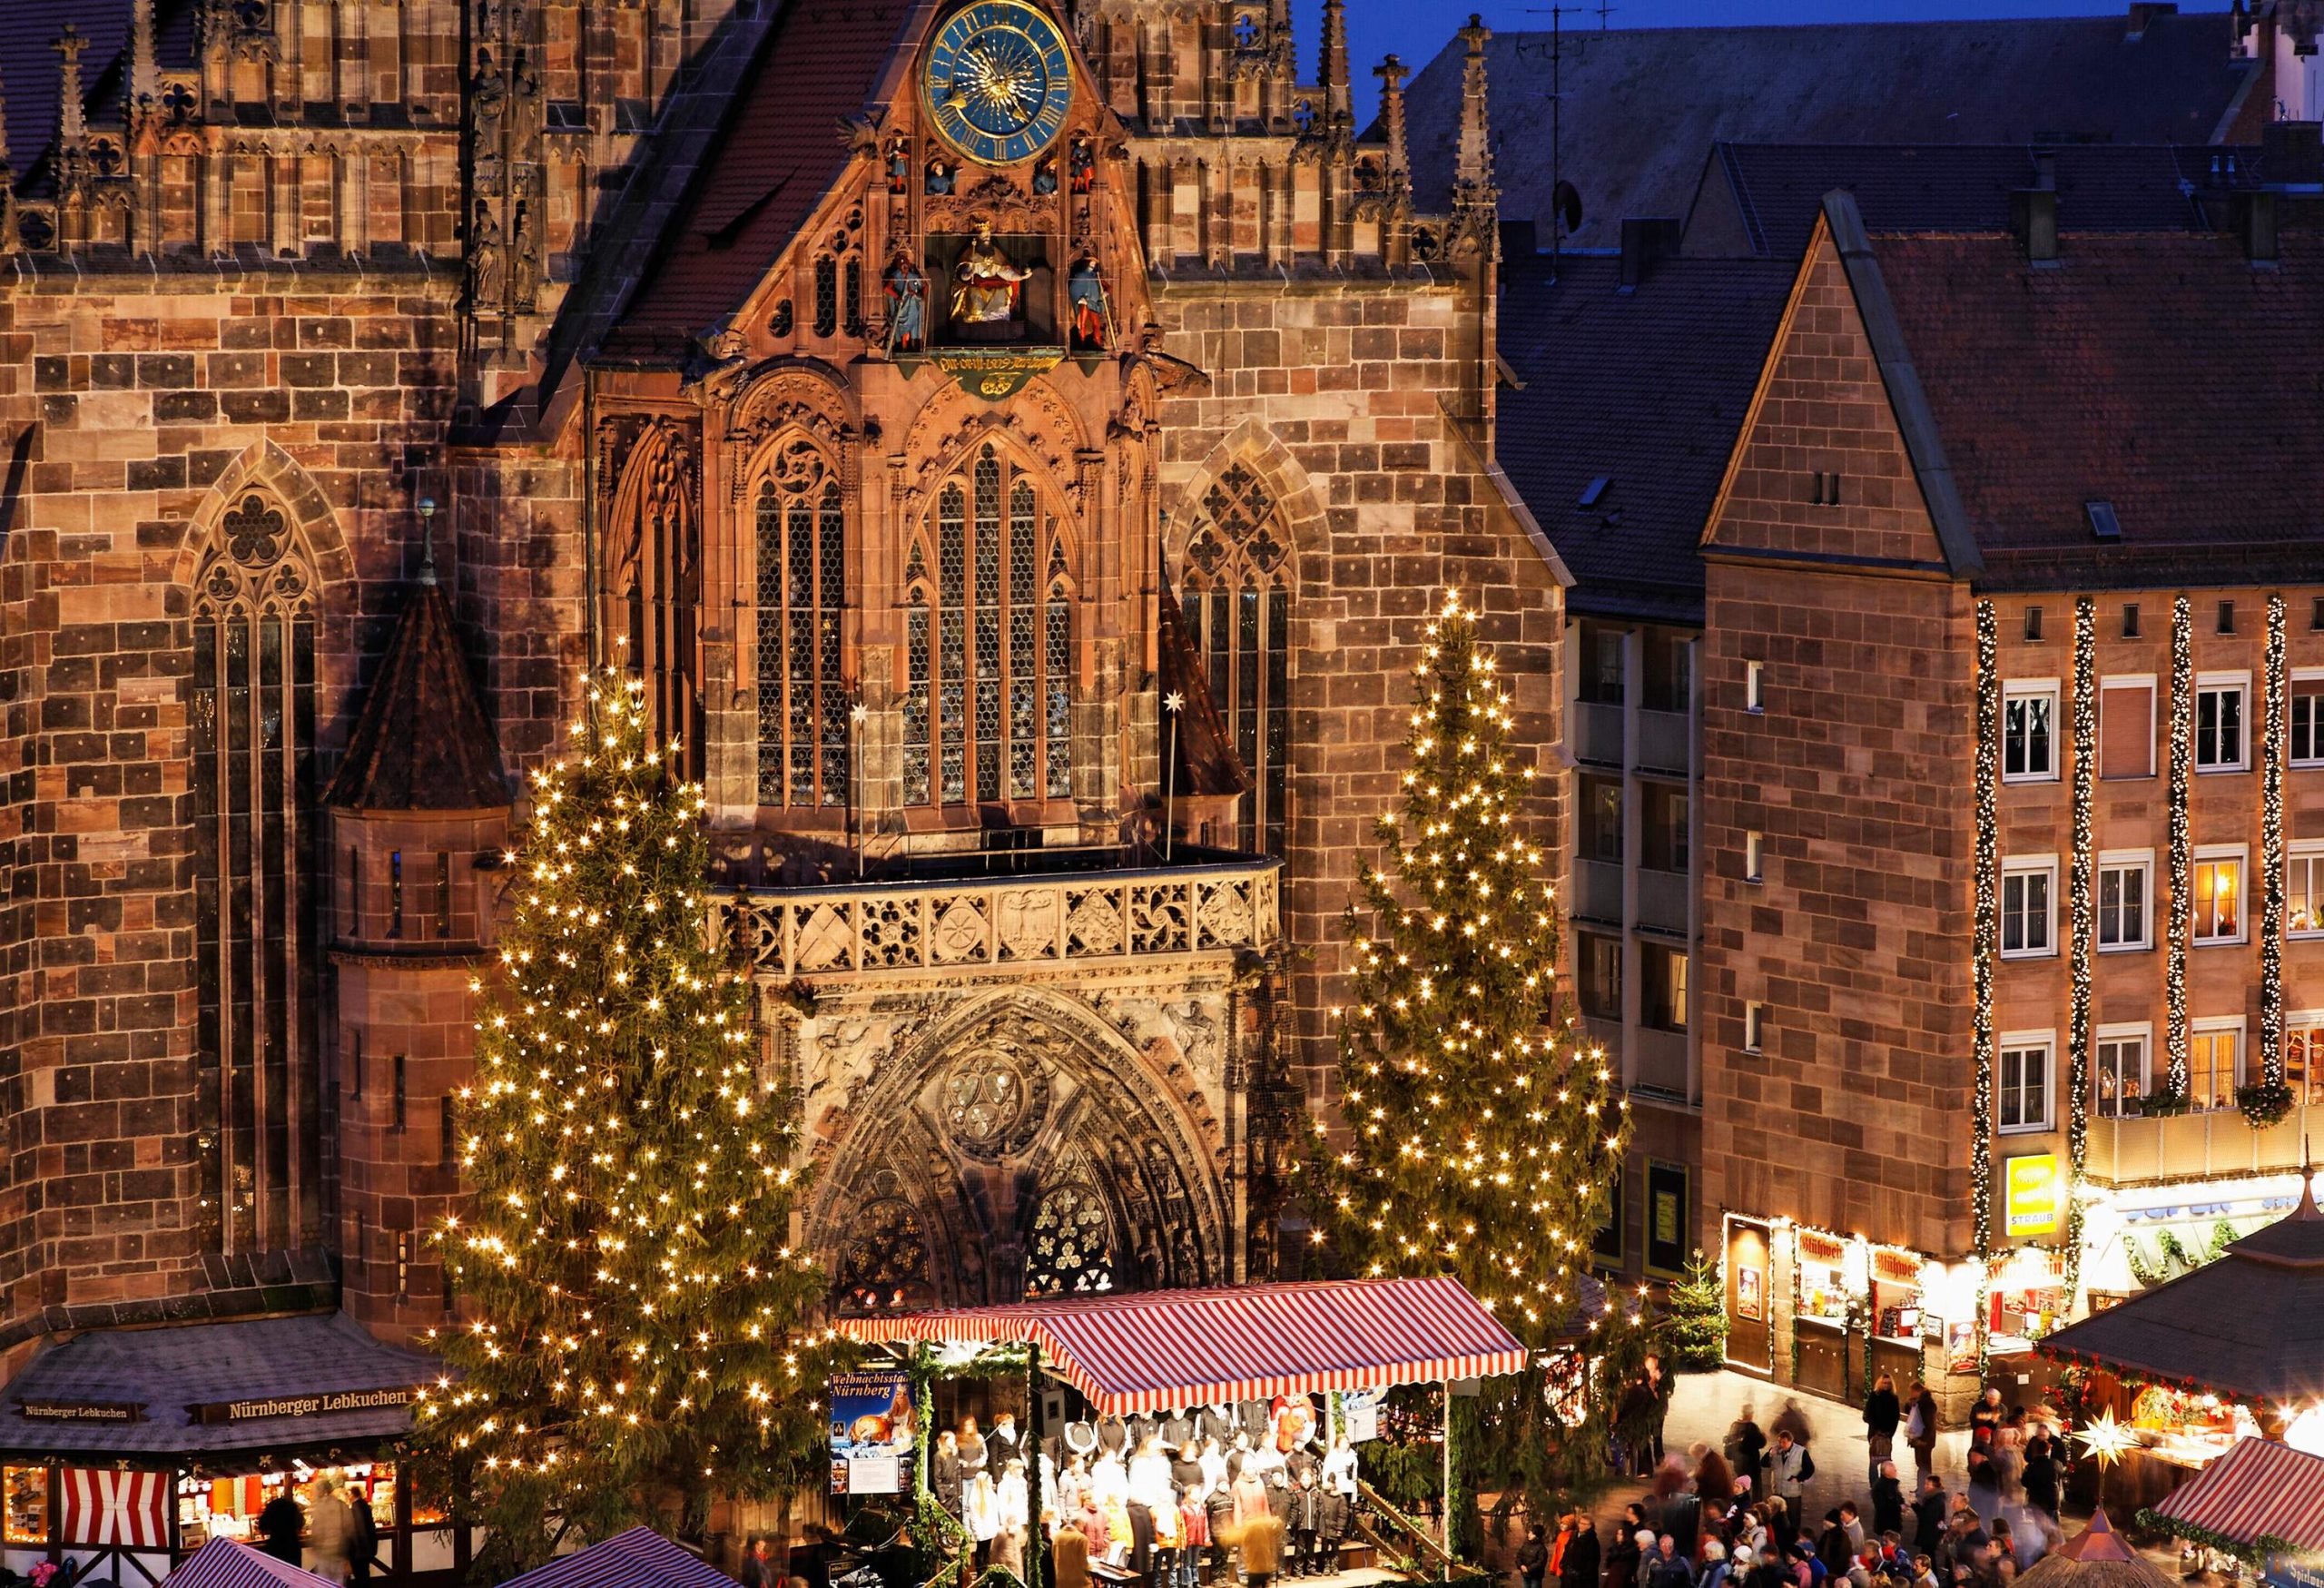 An elaborately decorated brick cathedral in Gothic style with tall Christmas trees on either side of its entryway and Christmas shops on the main square.